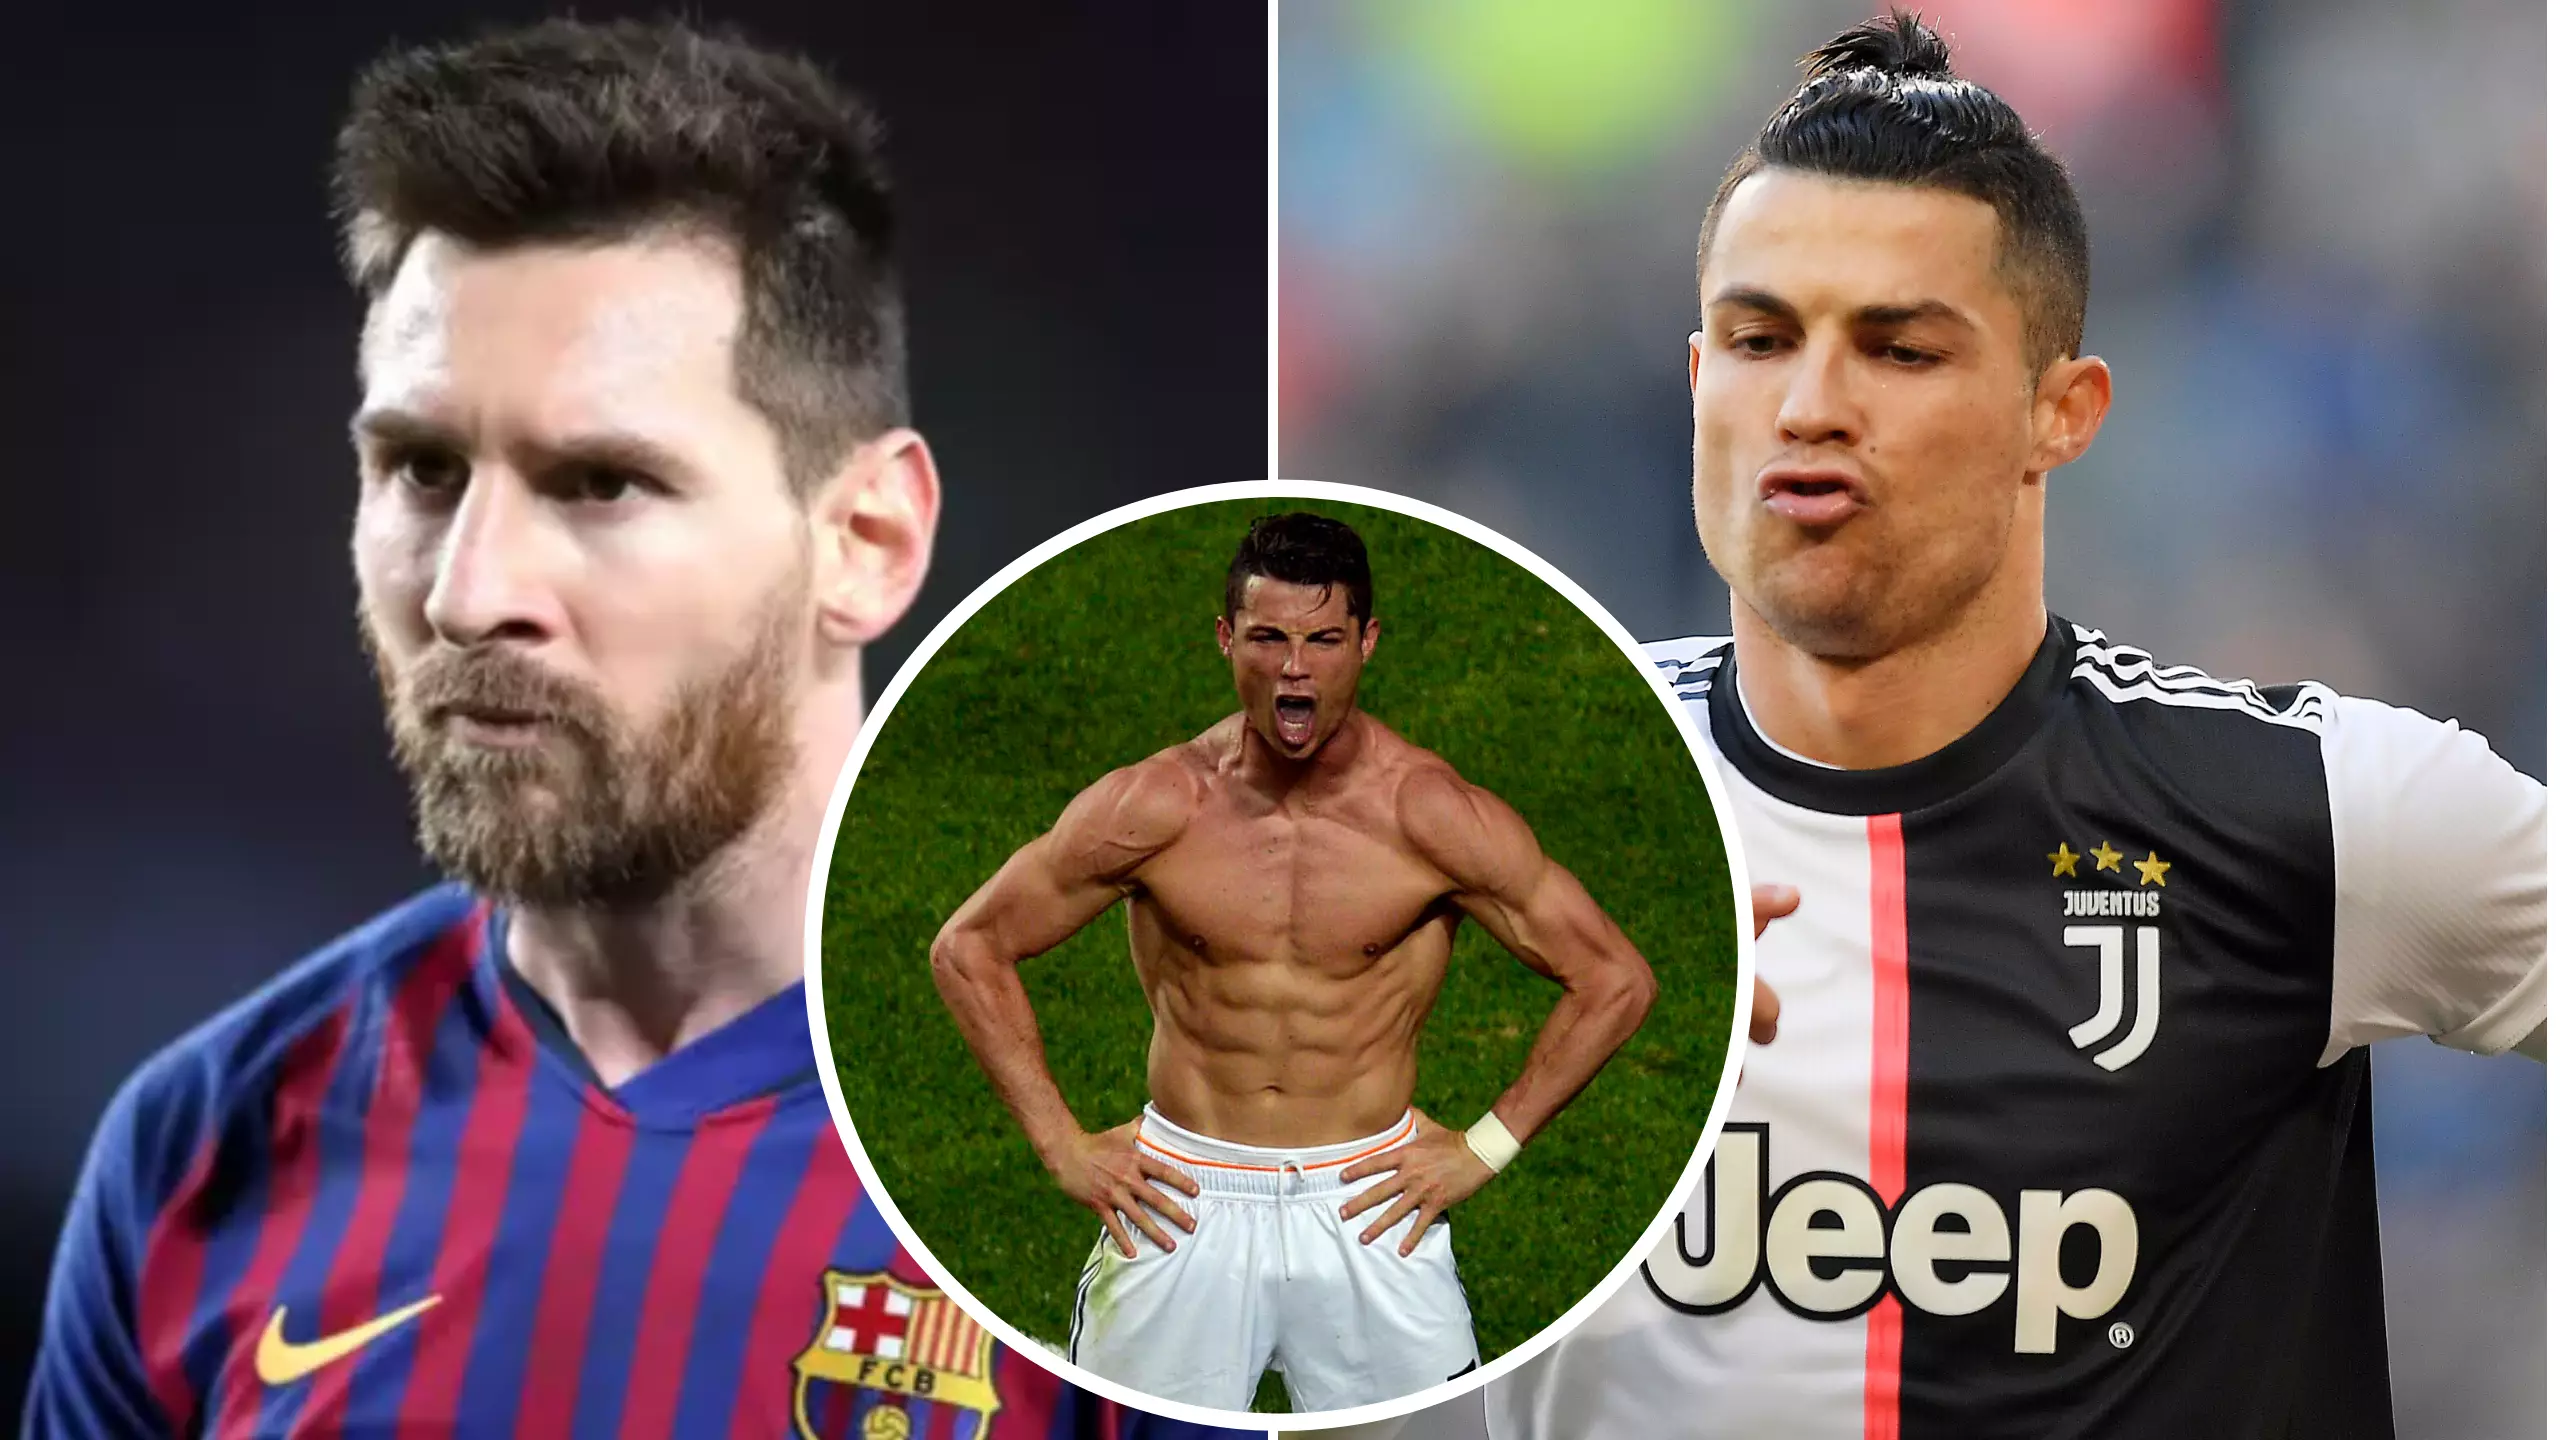 “Lionel Messi Is Not Cristiano Ronaldo - Physically, He’s Not The Same Machine"